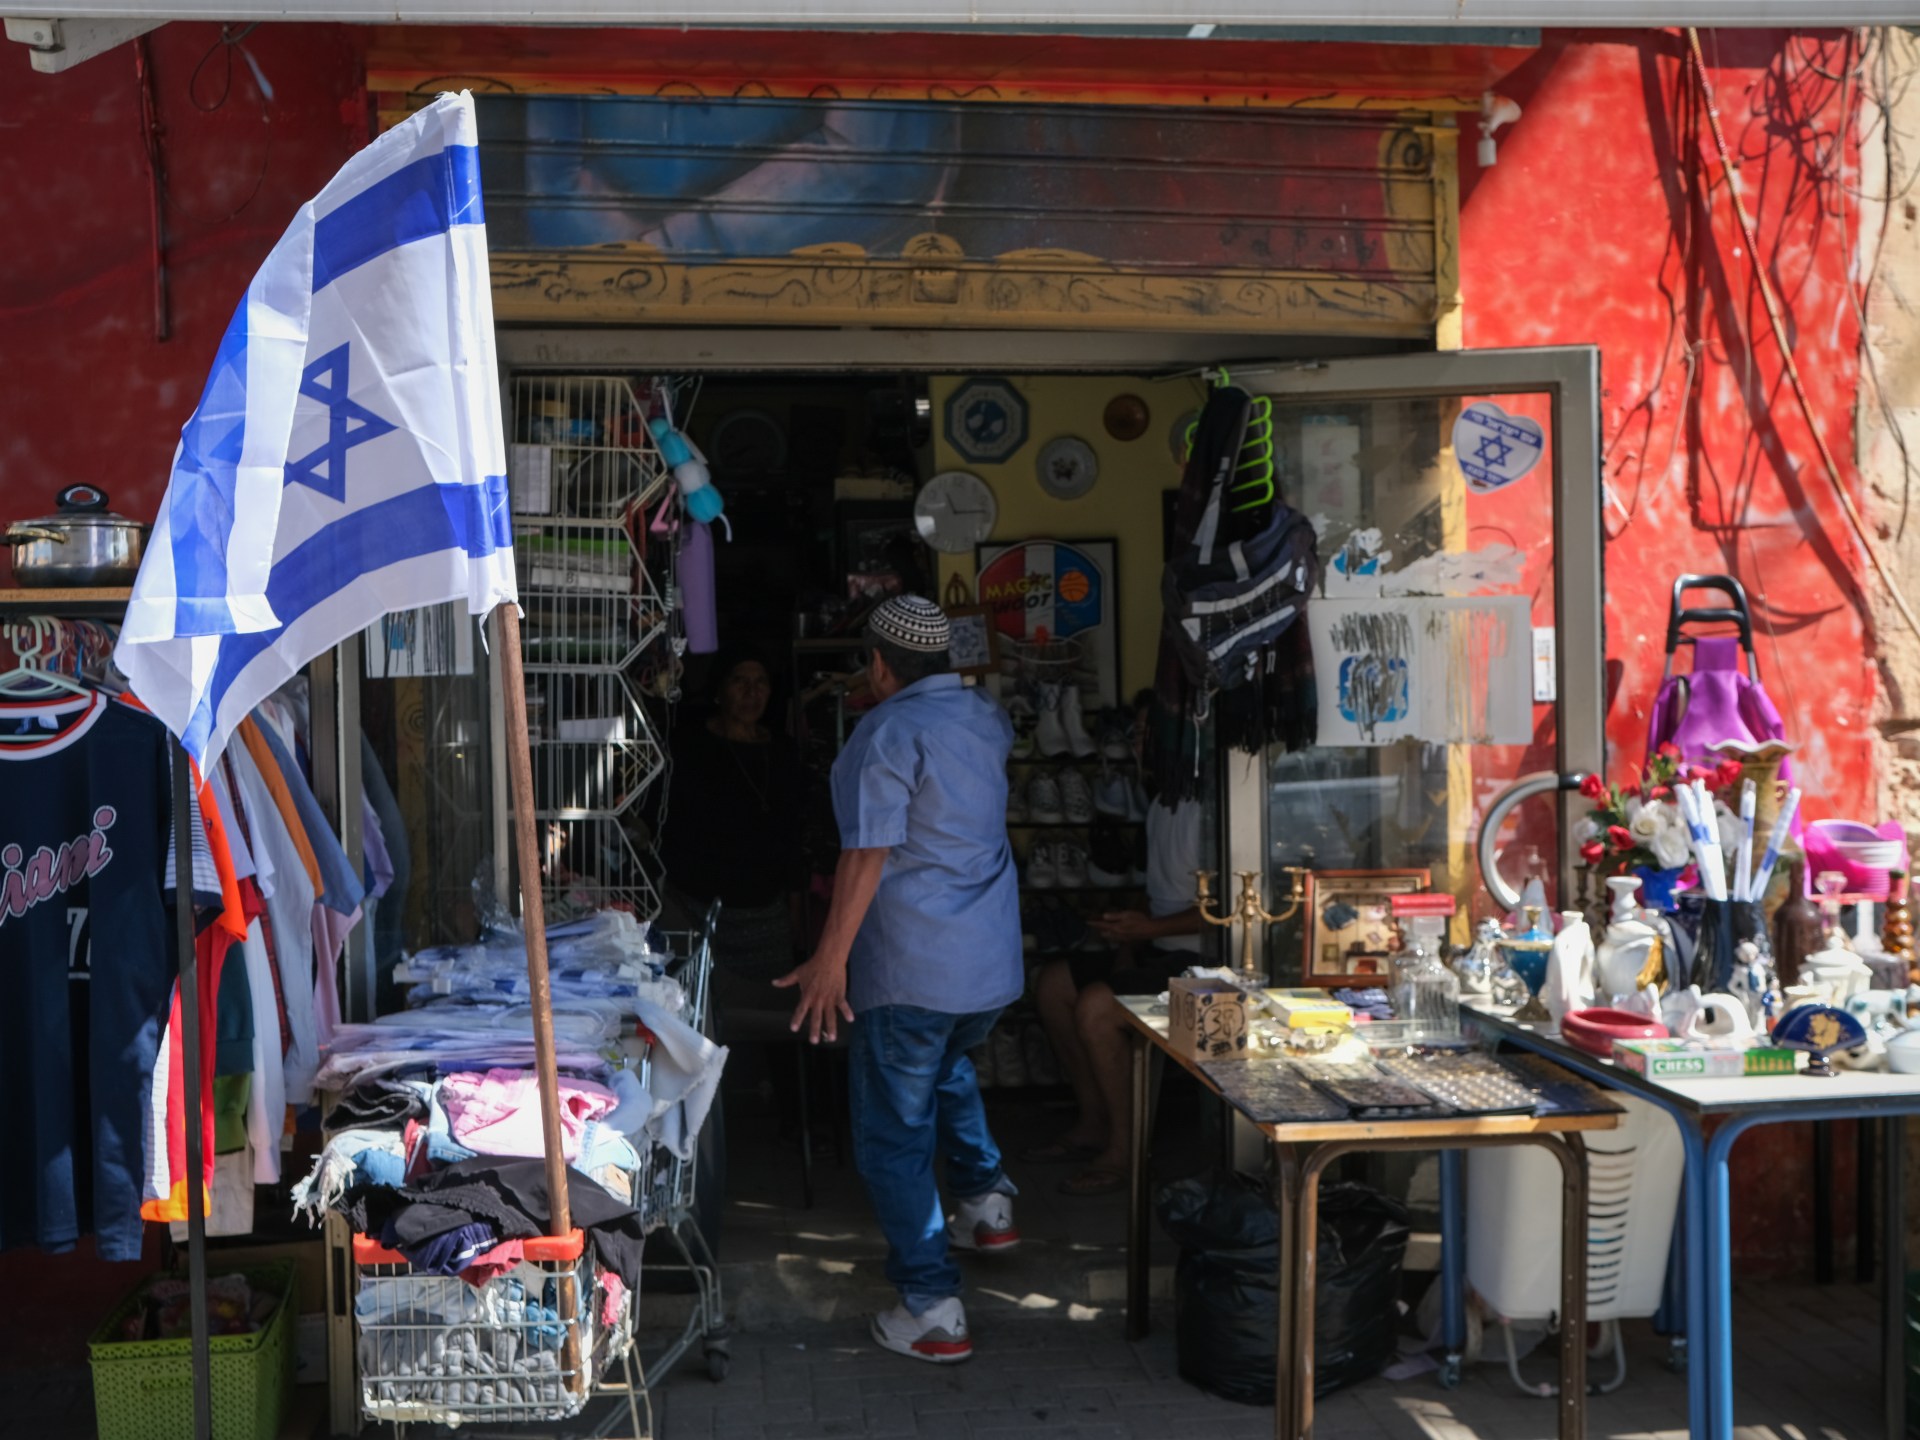 Life returns to an Israeli desert city, but fears of Hamas remain | Israel-Palestine conflict News